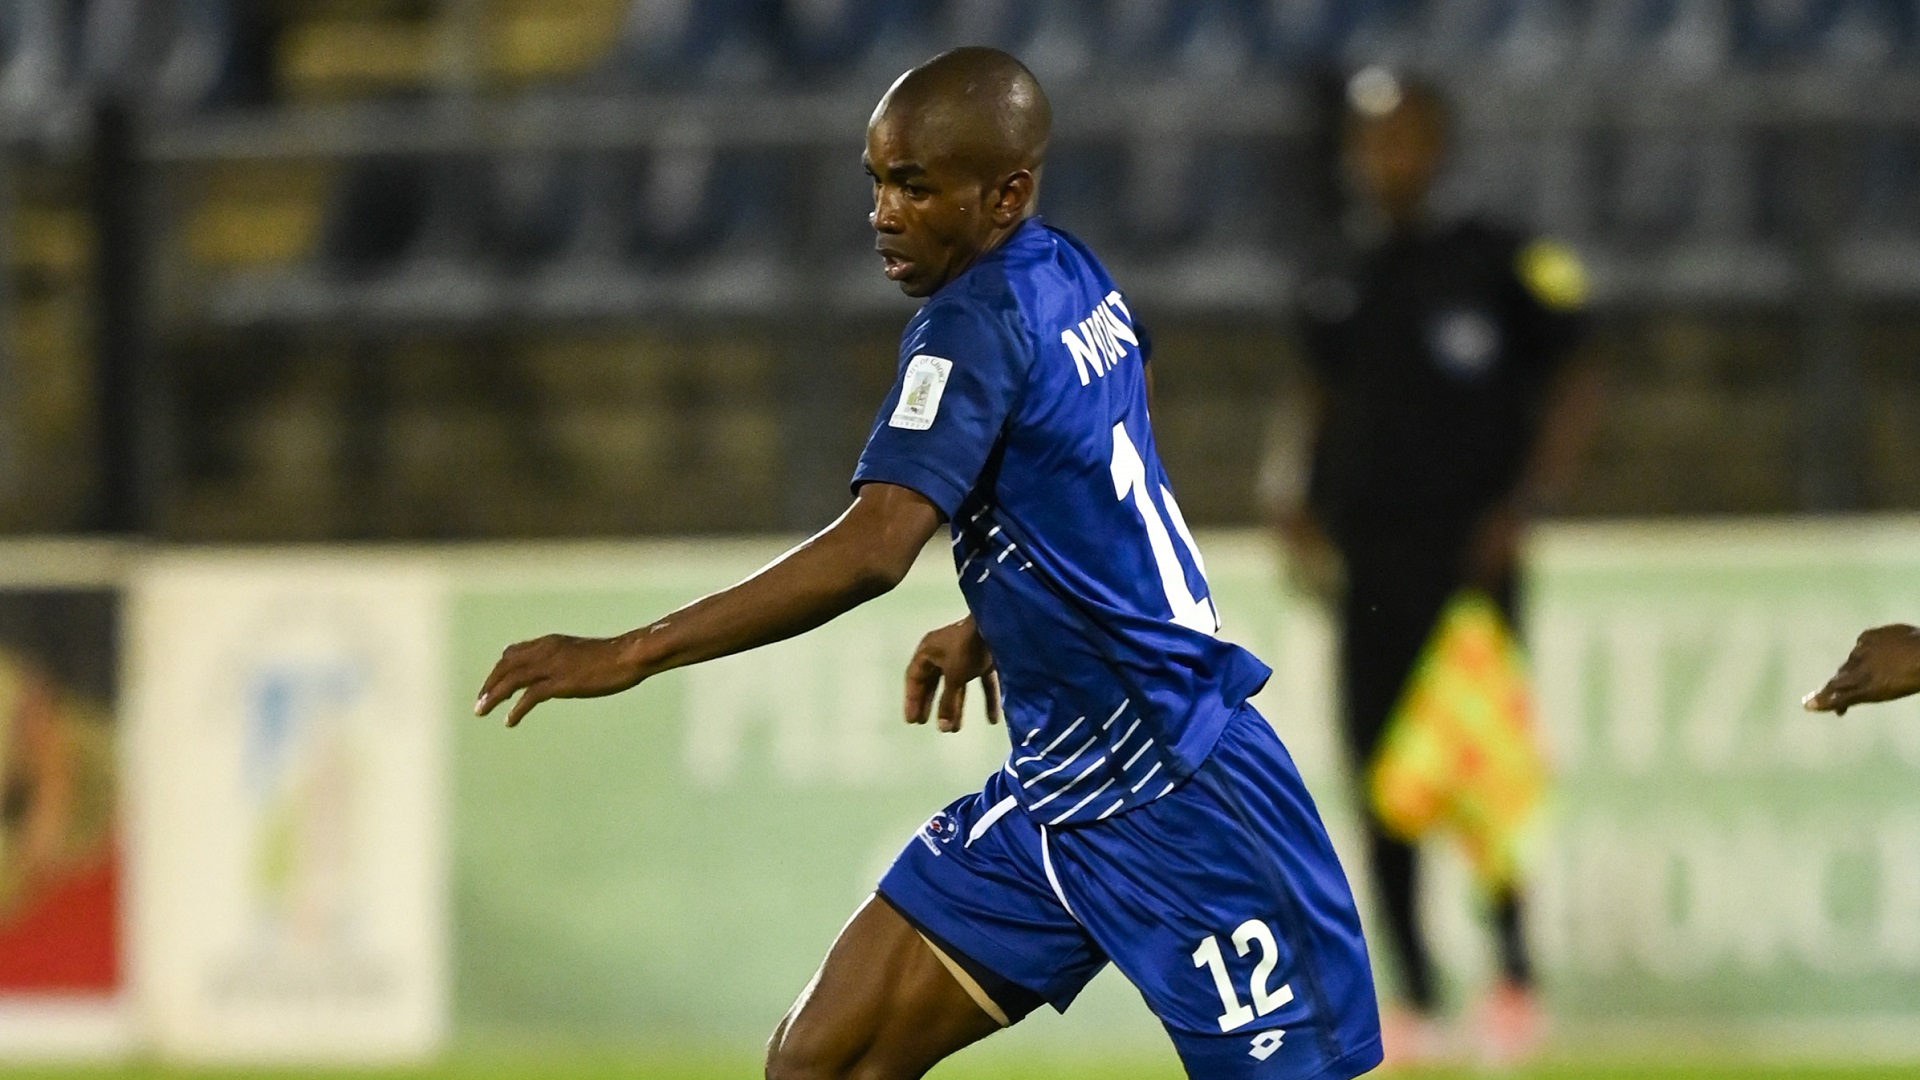 Ex-Maritzburg winger Nyoni reveals interest from Europe and Egypt after social media drive